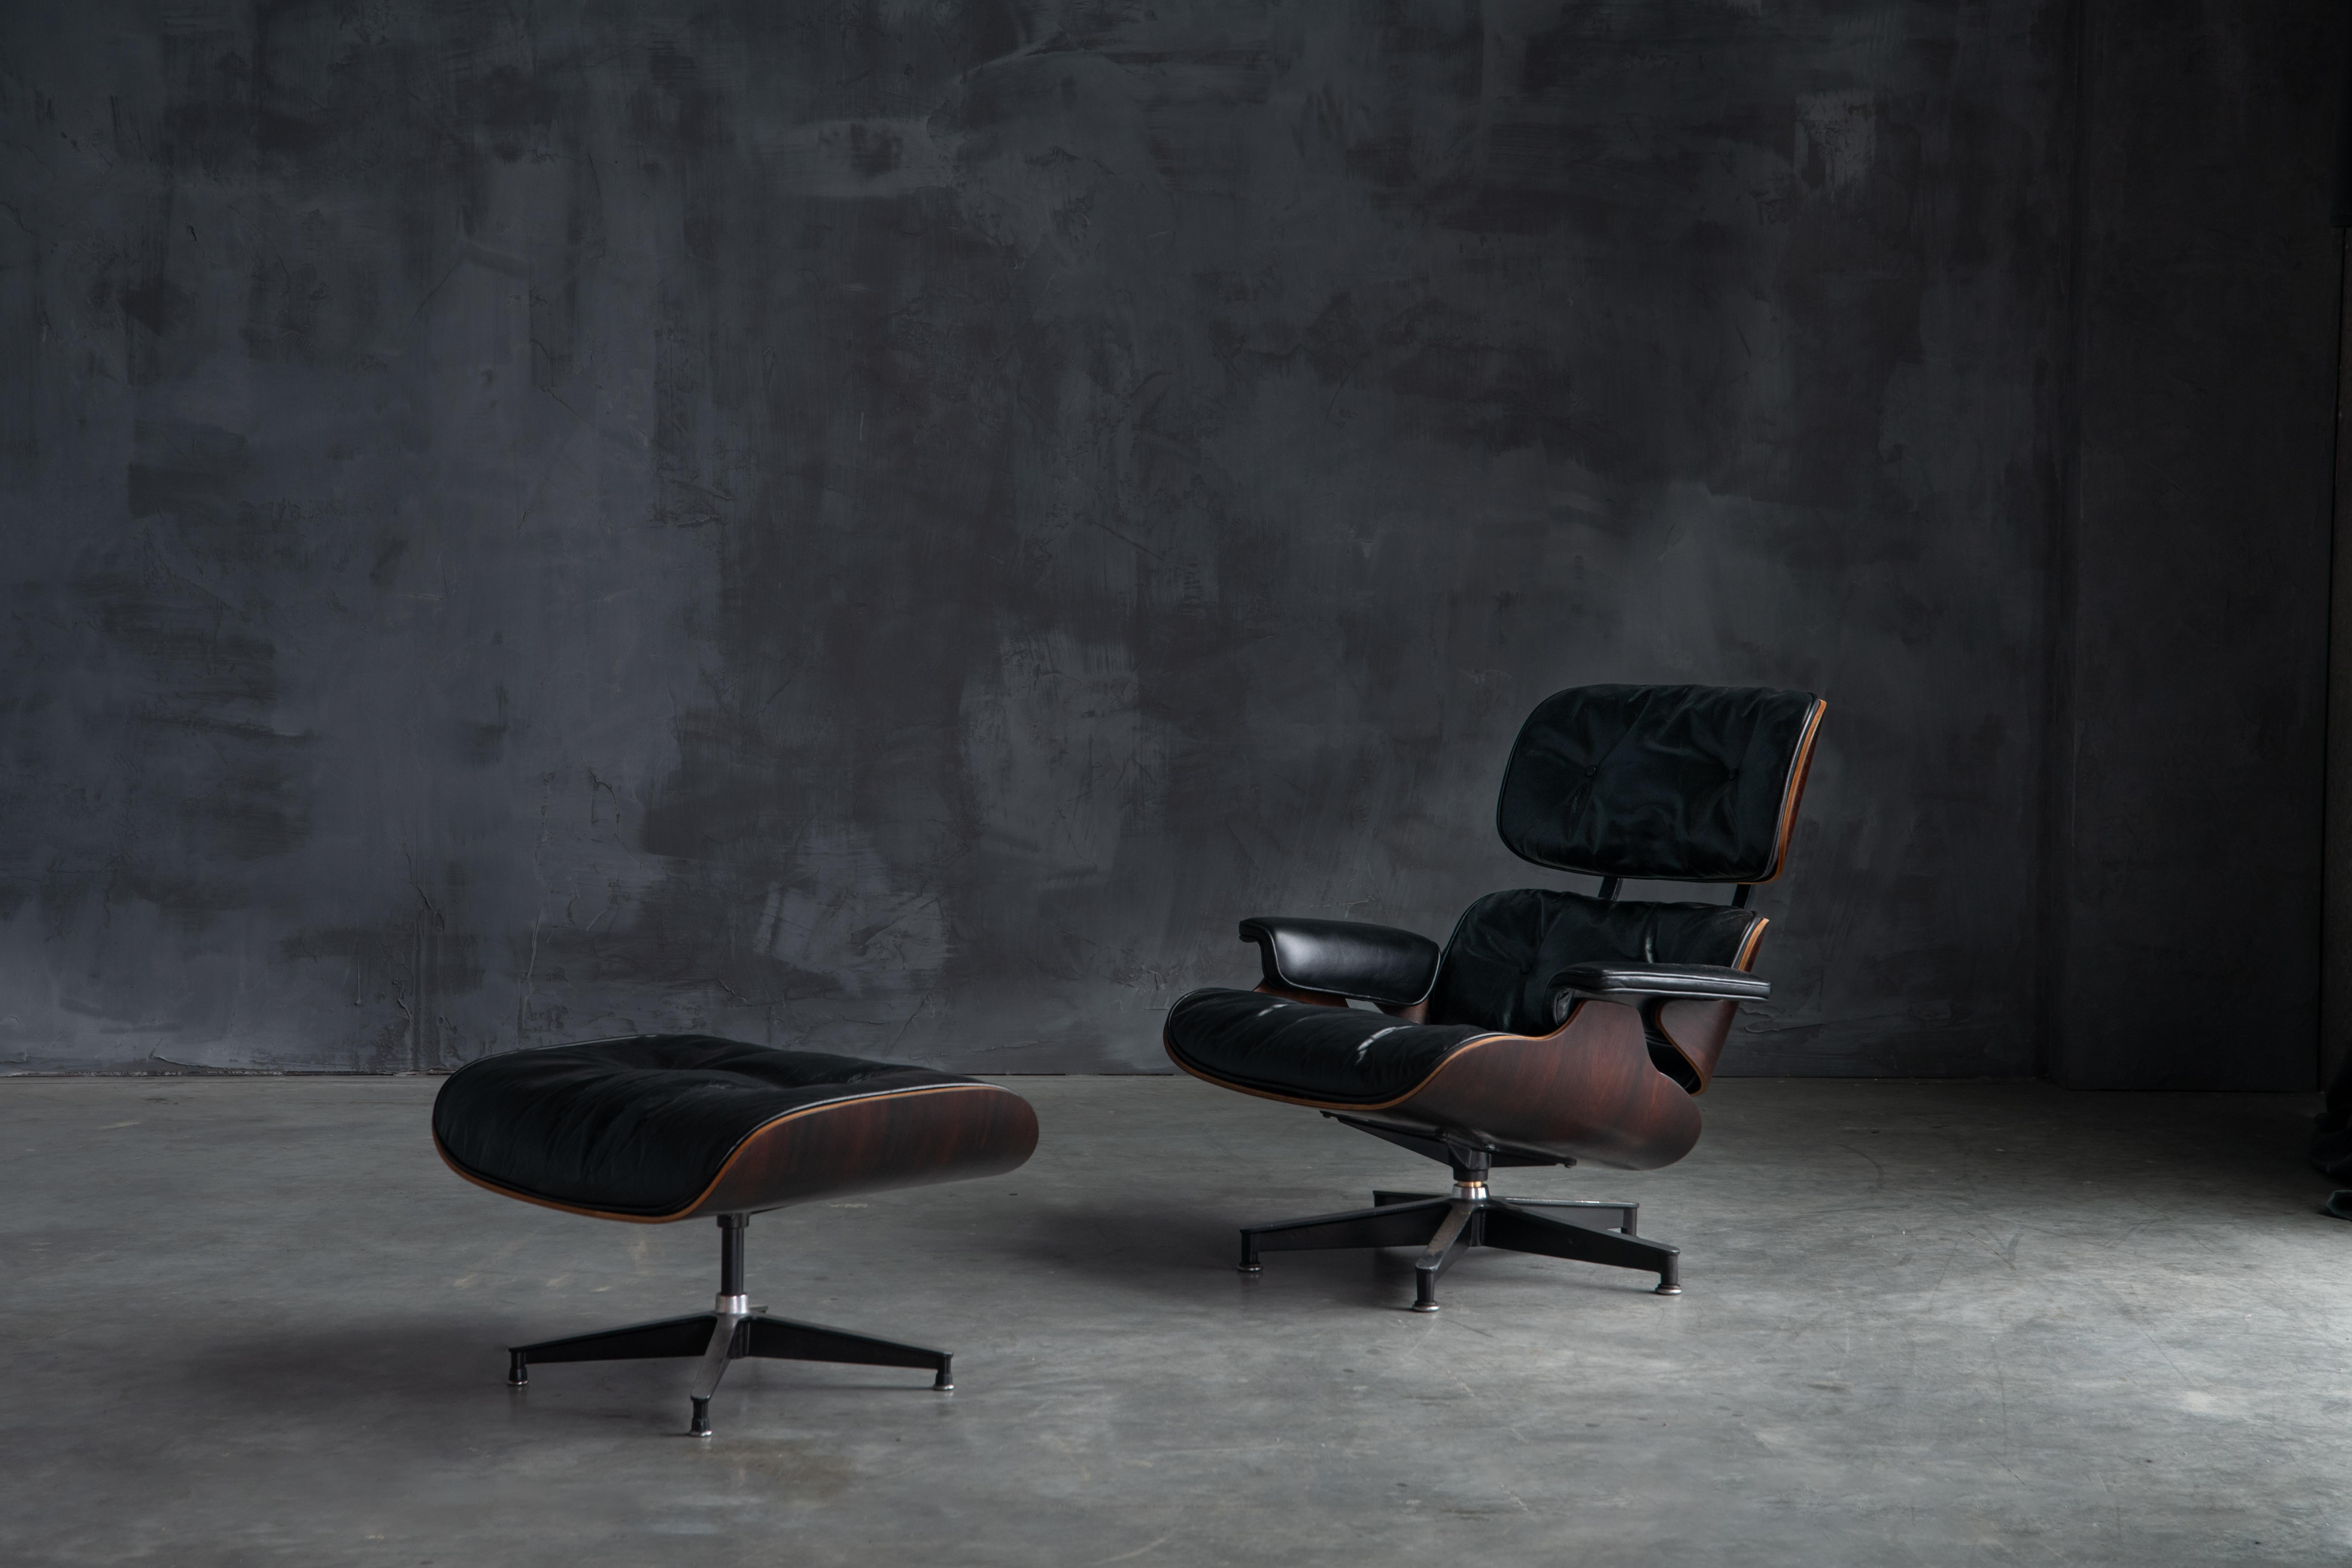 Eames lounge chair with ottoman, designed by the iconic duo Charles and Ray Eames for Herman Miller. This timeless icon has been carefully restored to its first-generation glory, born March 5, 1957, in the United States. It features the signature